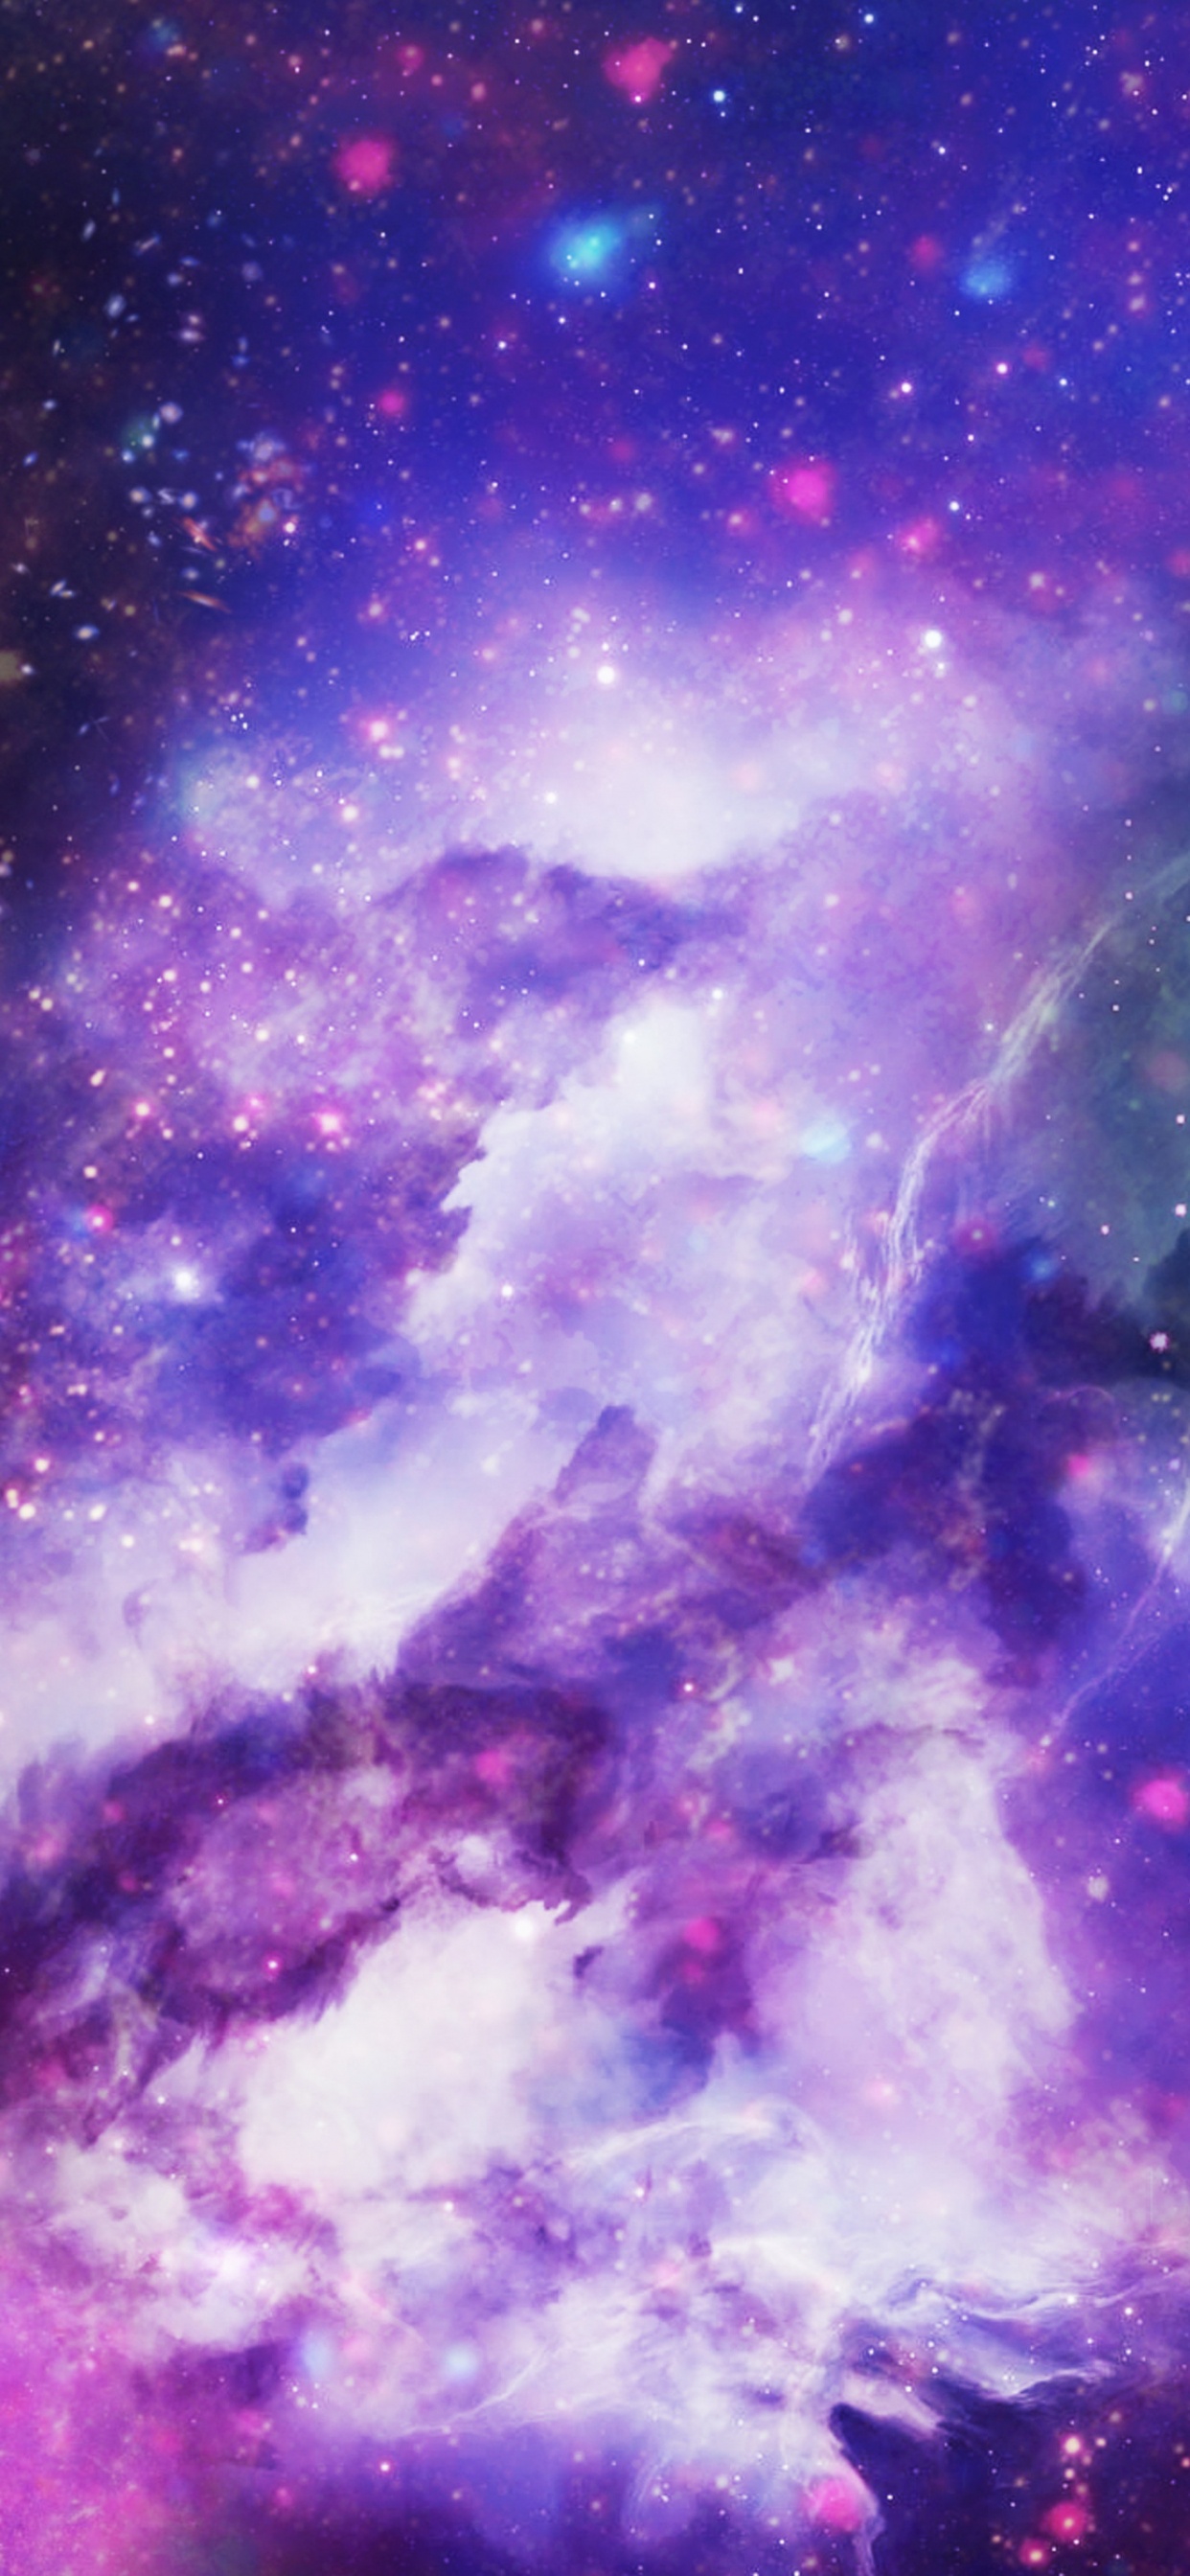 Purple and Blue Galaxy Illustration. Wallpaper in 1242x2688 Resolution